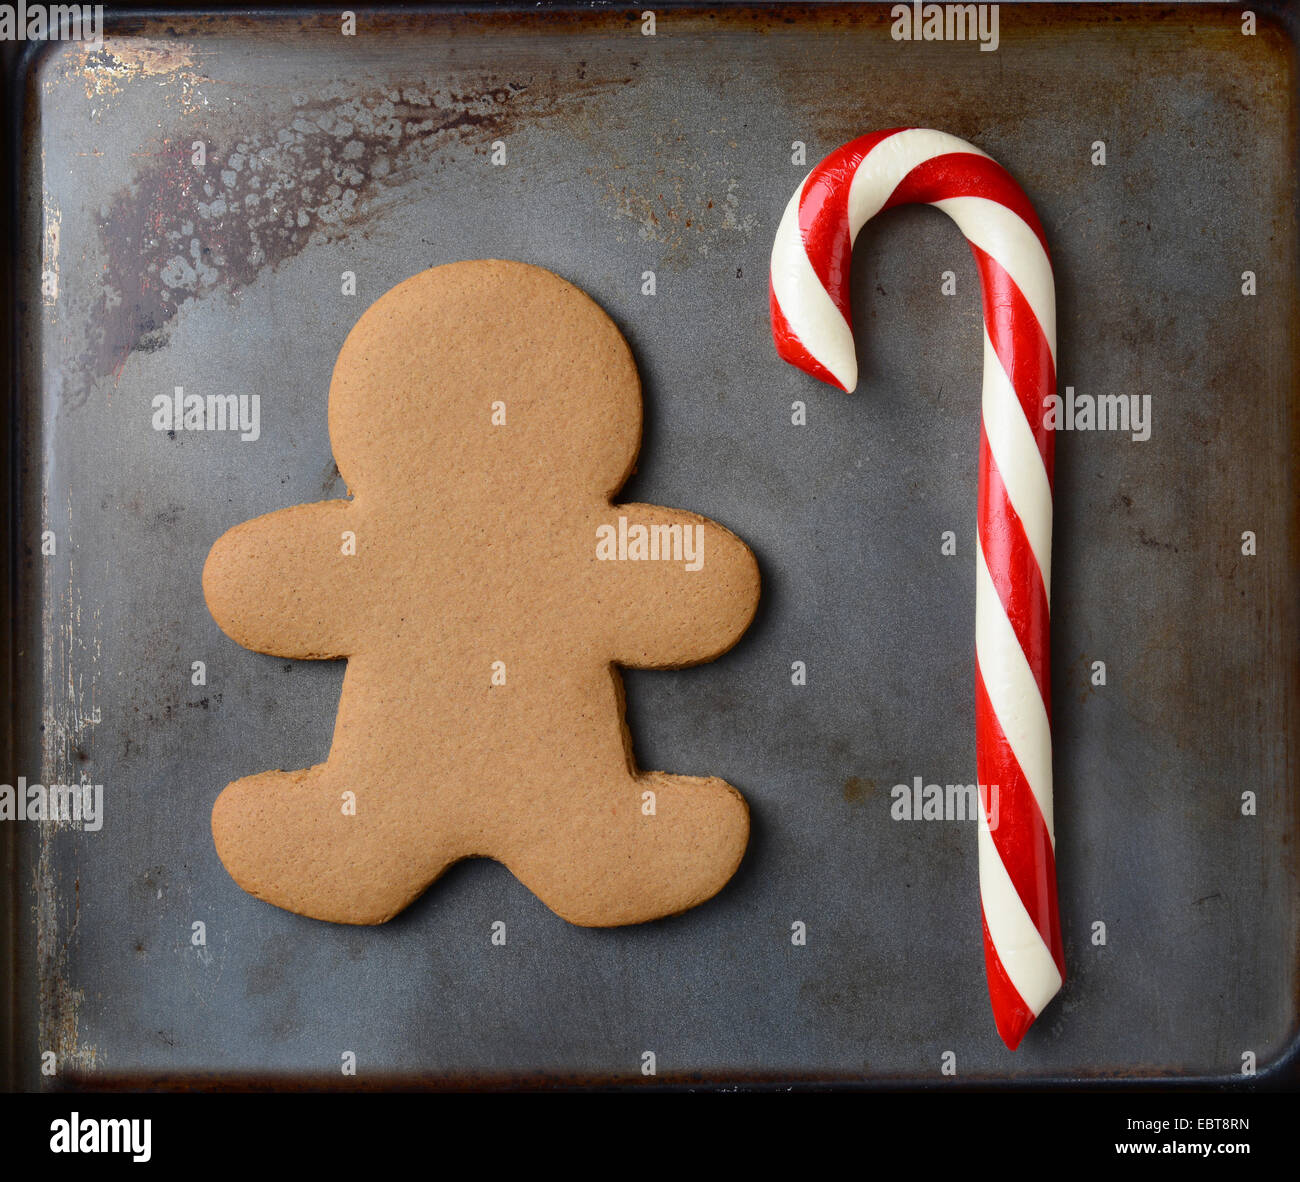 Closeup of an old fashioned candy cane and a gingerbread man on a metal cookie sheet. The cookie is undecorated. Square format. Stock Photo